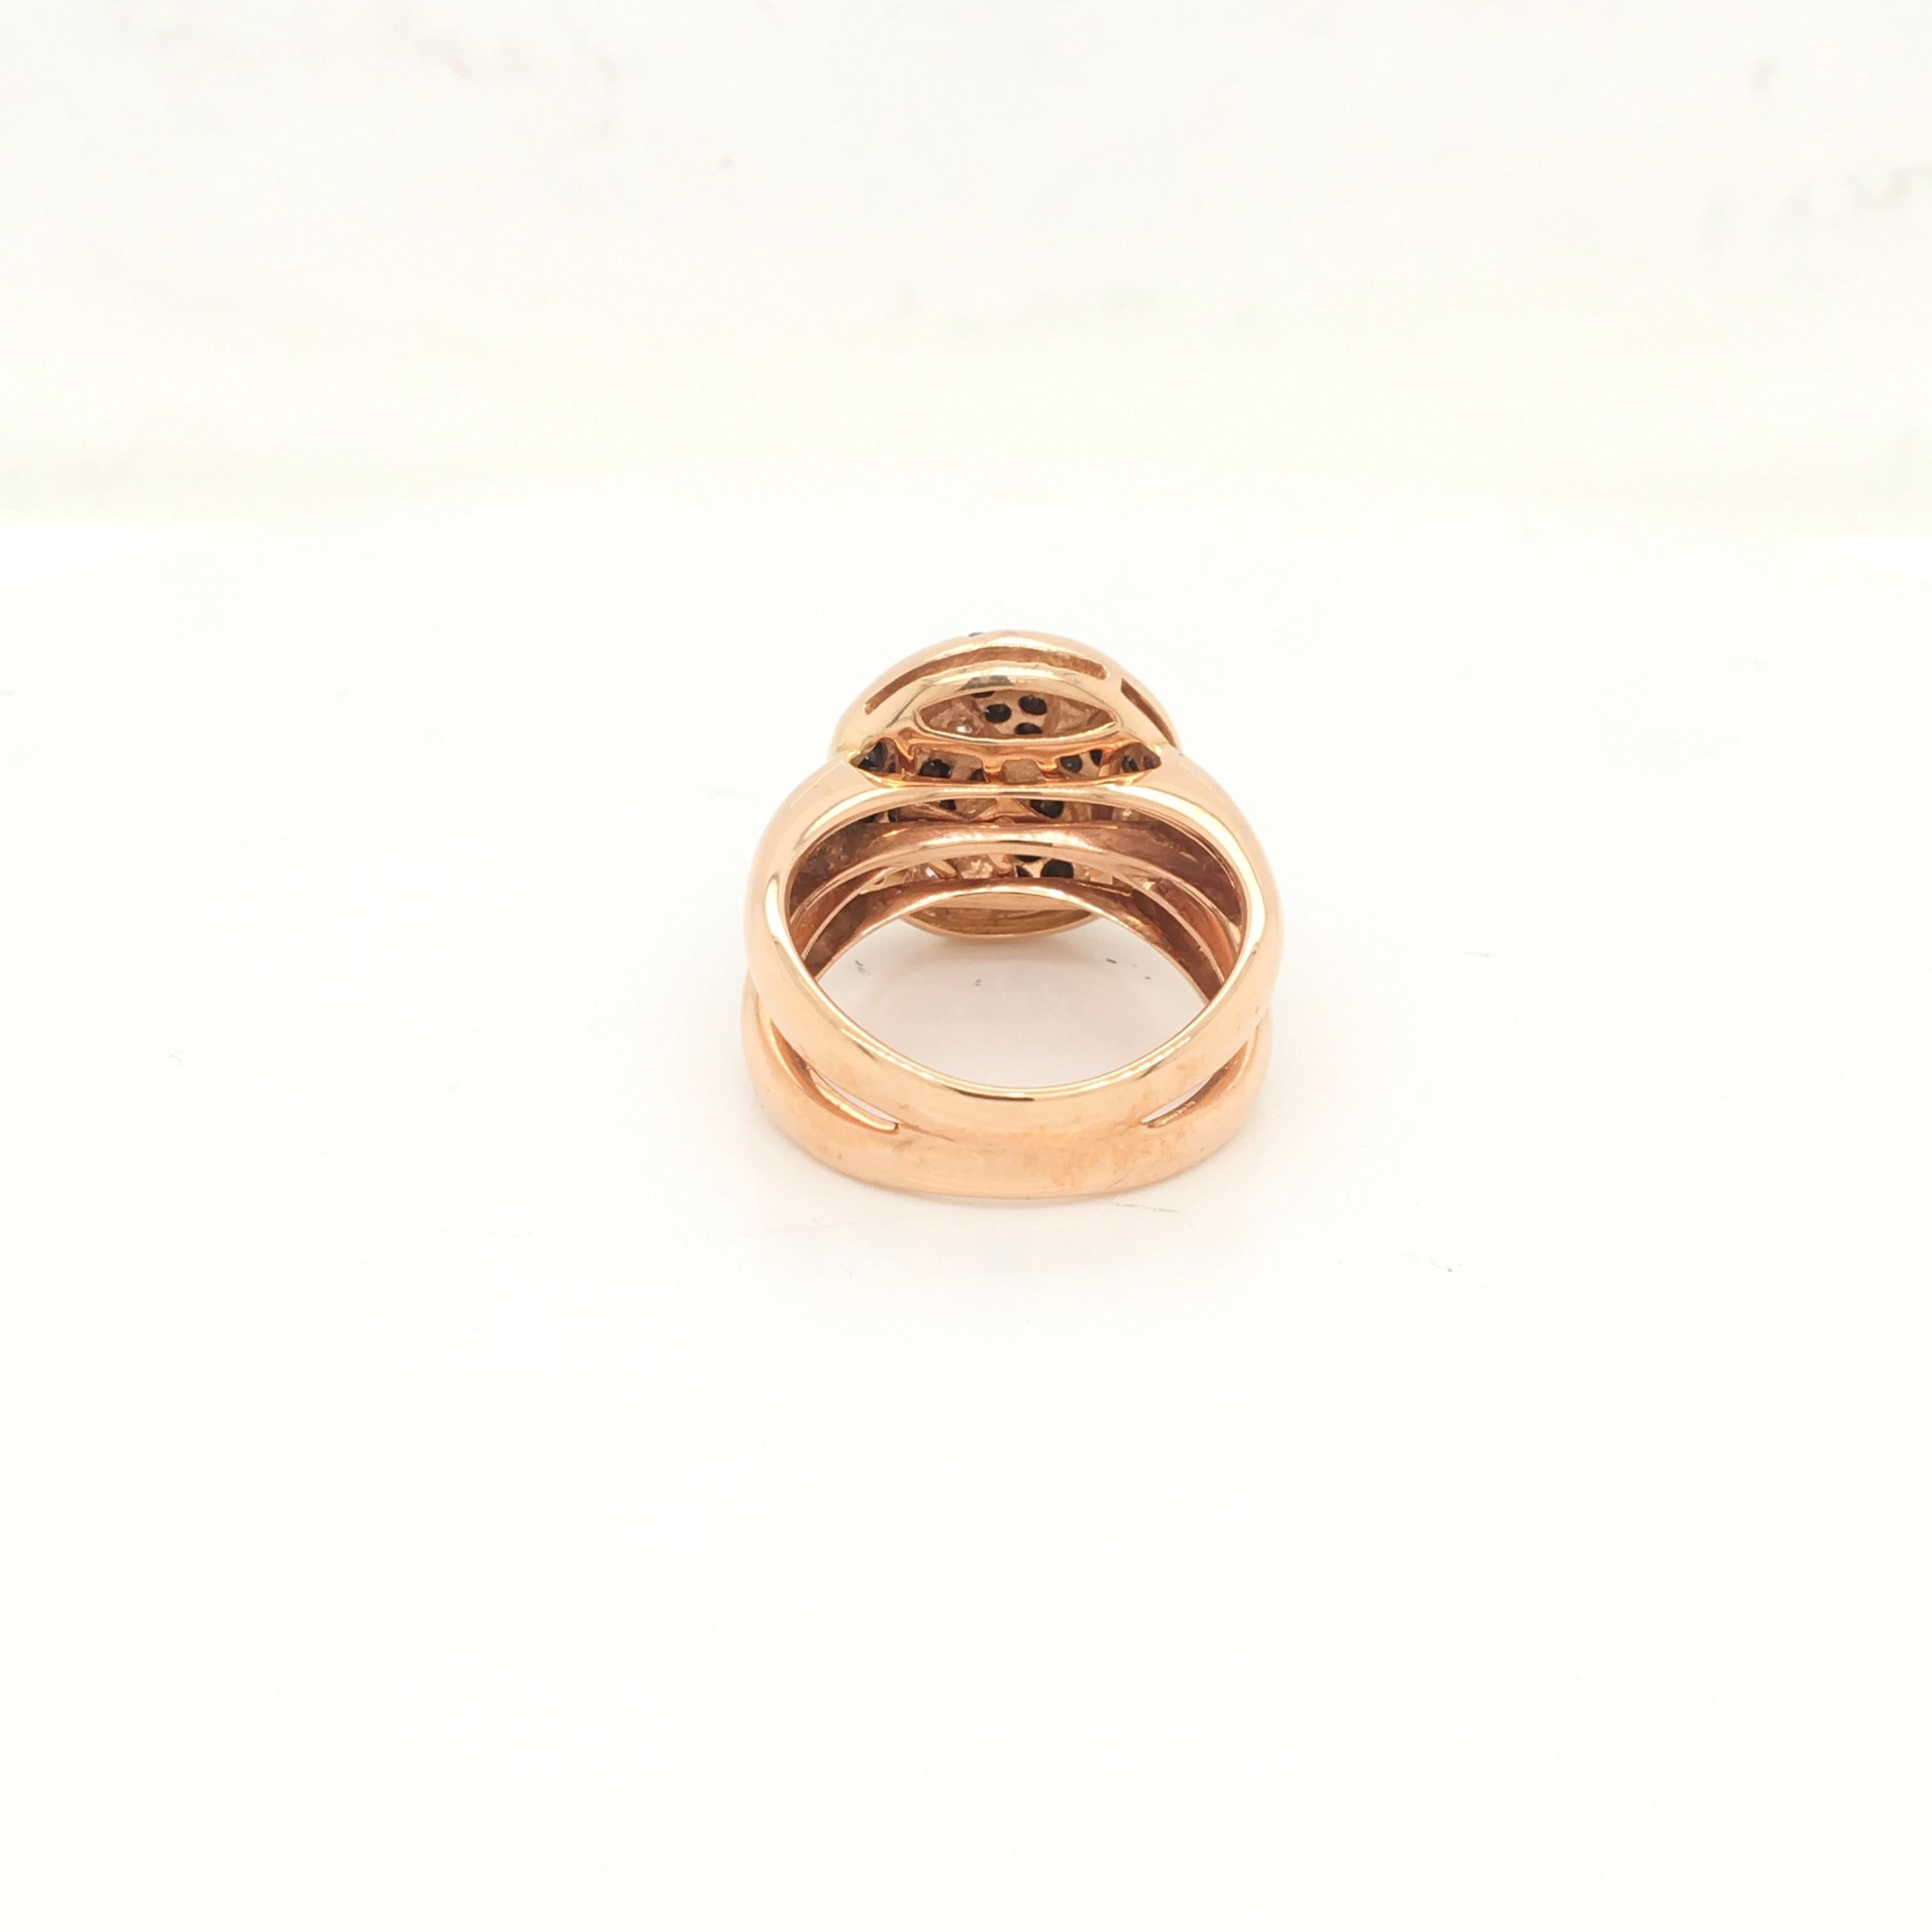 Aesthetic Movement 18 Karat Rose Gold Ring Set with Black and White Diamonds Made in Italy For Sale